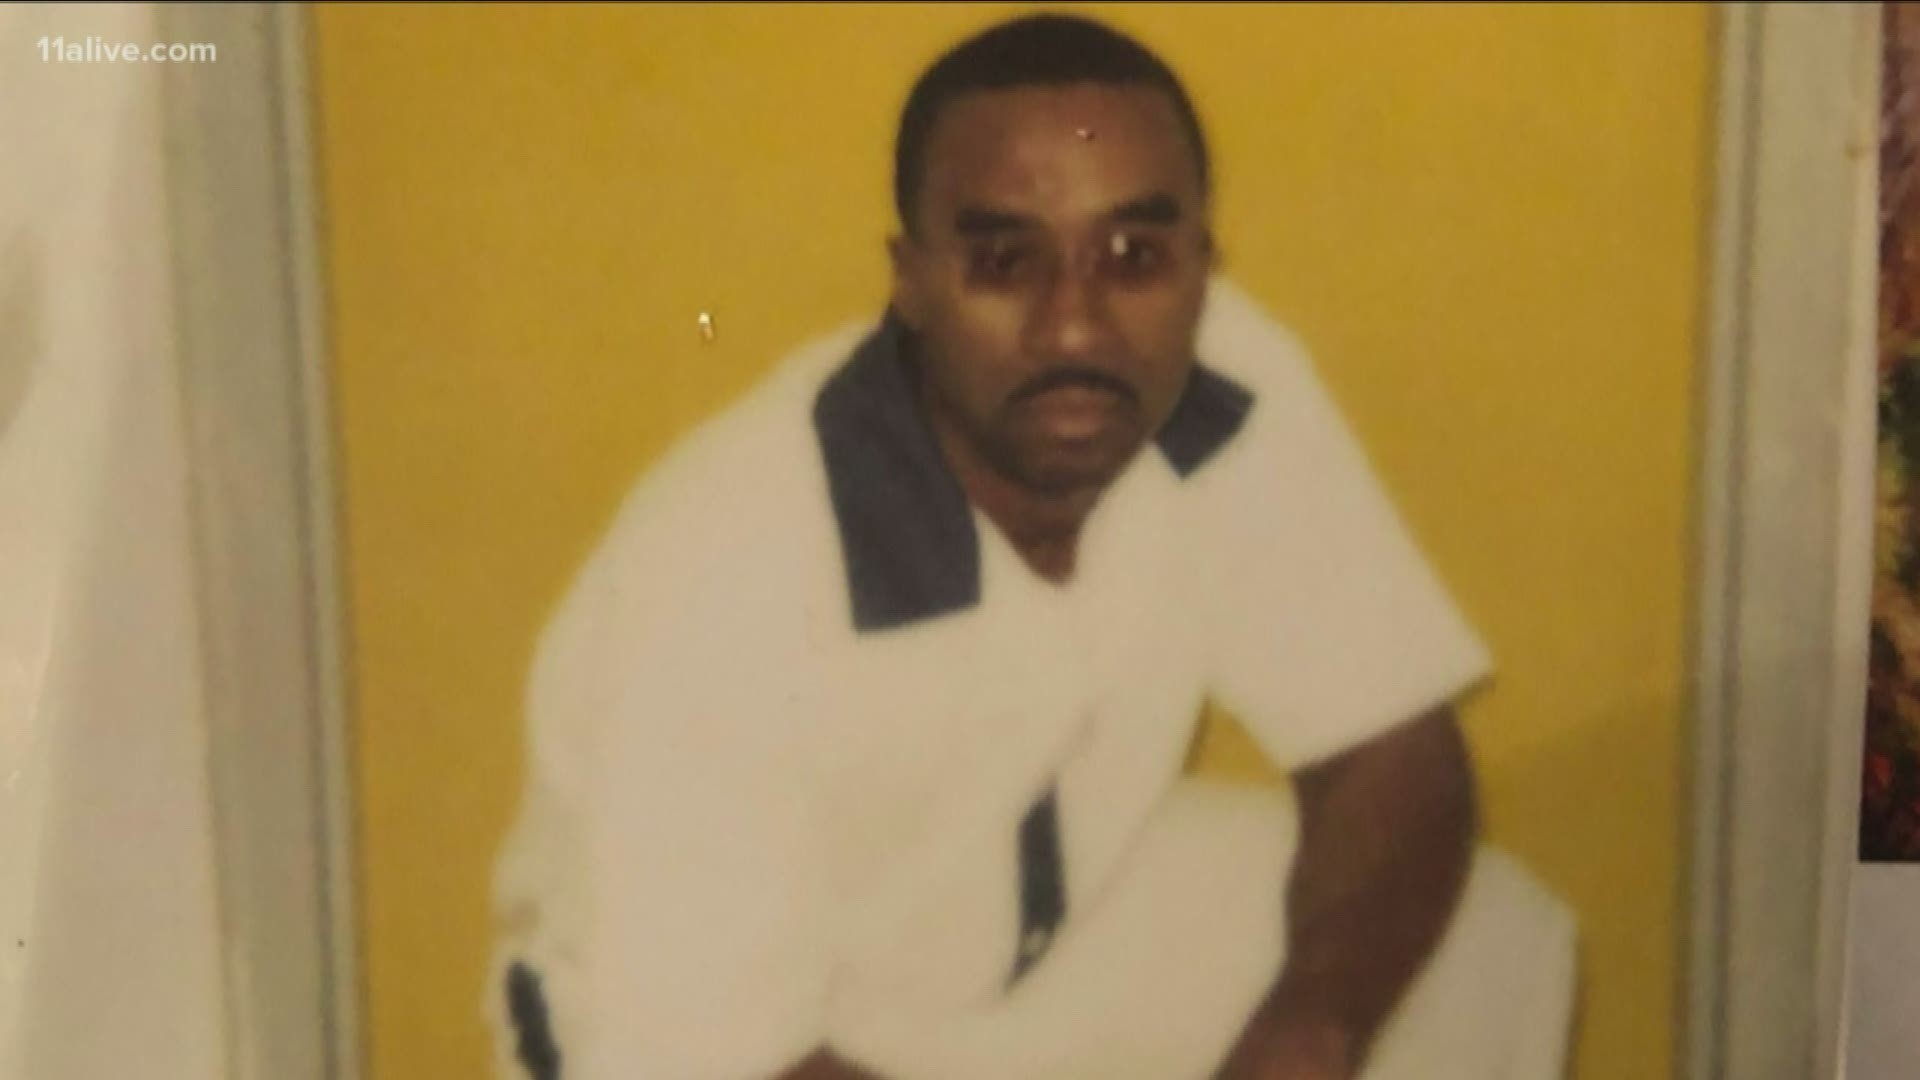 On Wednesday, Nov. 13, Georgia put Cromartie to death with a lethal injection. The 52-year-old was pronounced dead at 10:59 p.m.